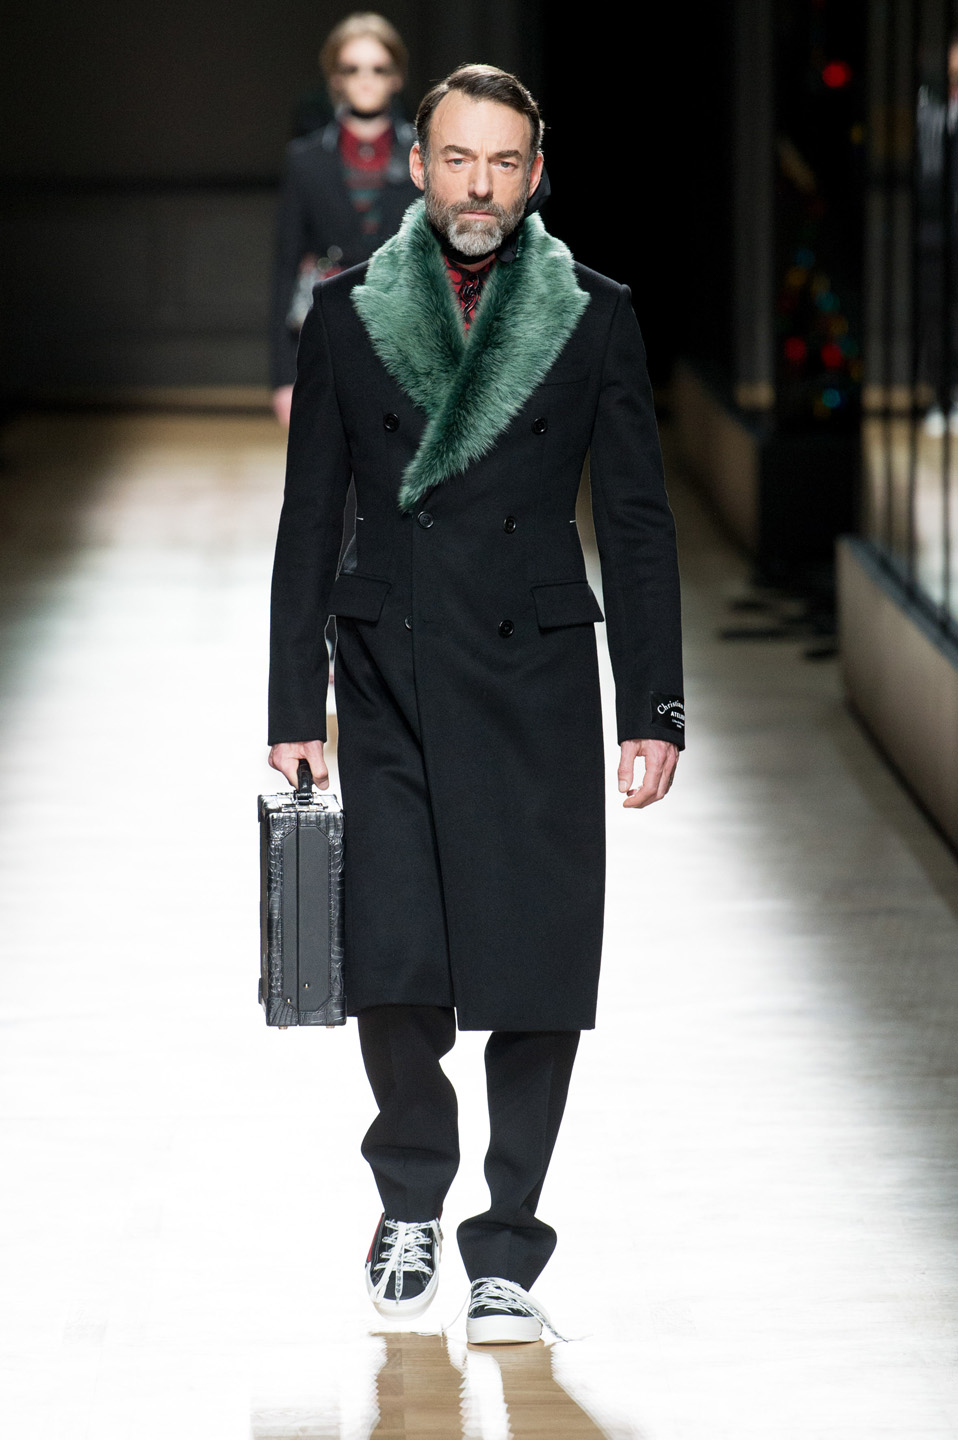 DIOR HOMME WINTER 18 19 BY PATRICE STABLE look14 Fall/WInter 2018 runway